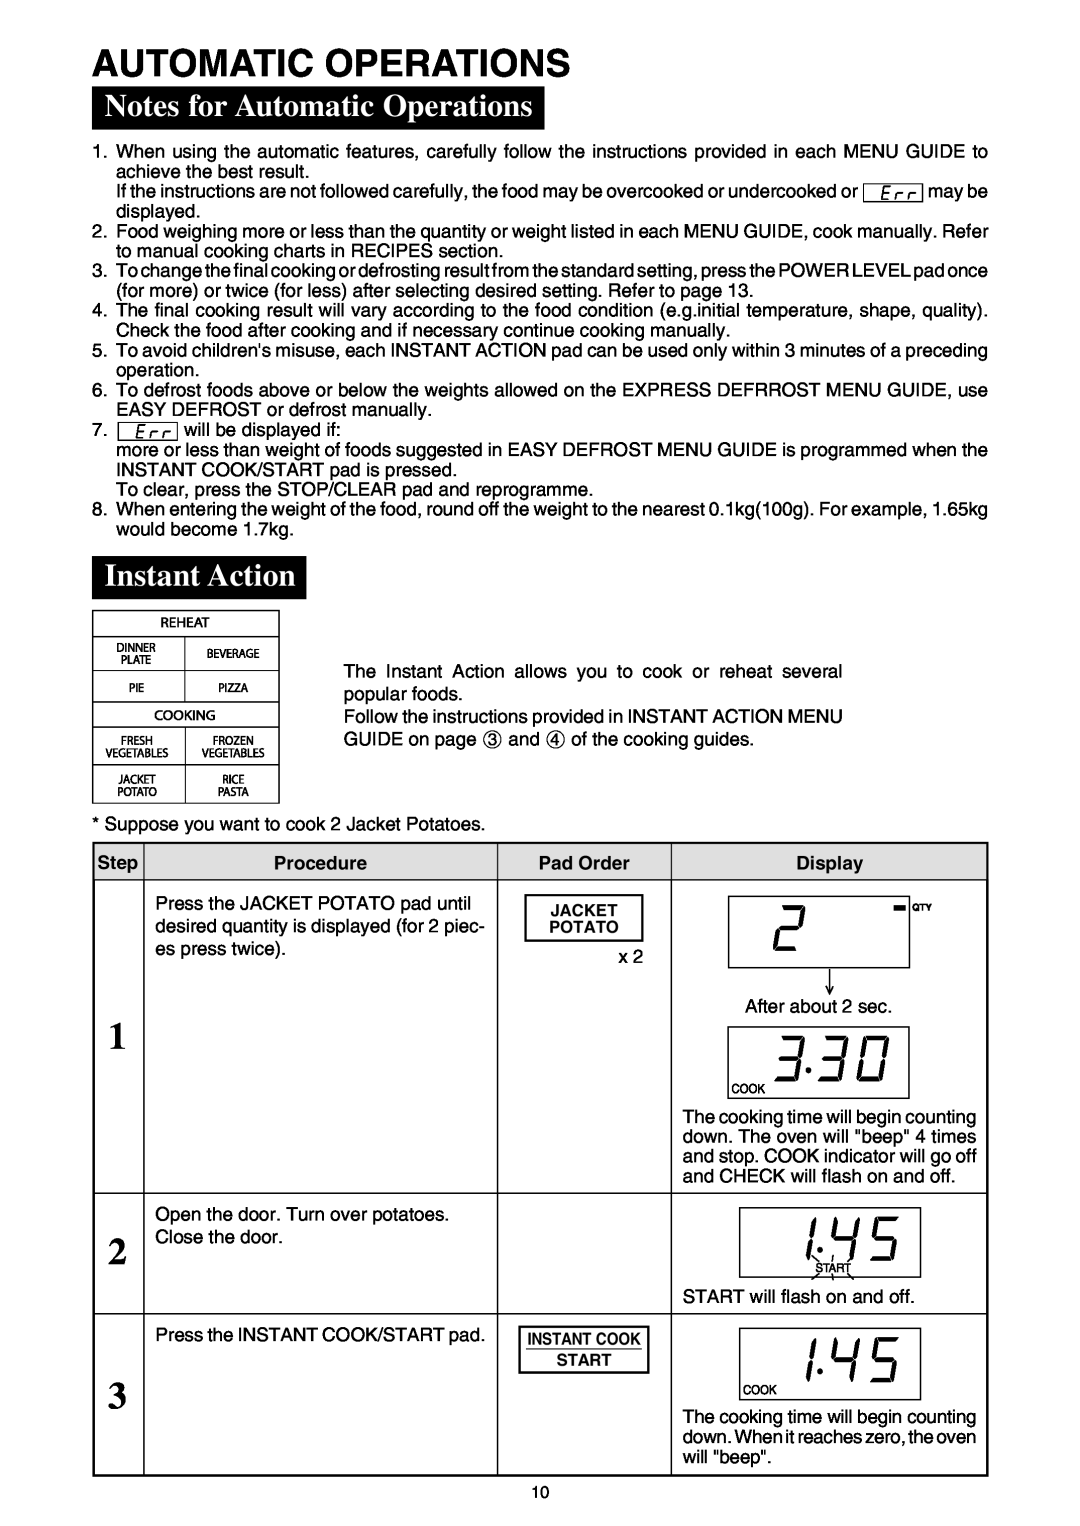 Sharp R-395F(S), R-330F J operation manual Notes for Automatic Operations, Instant Action 